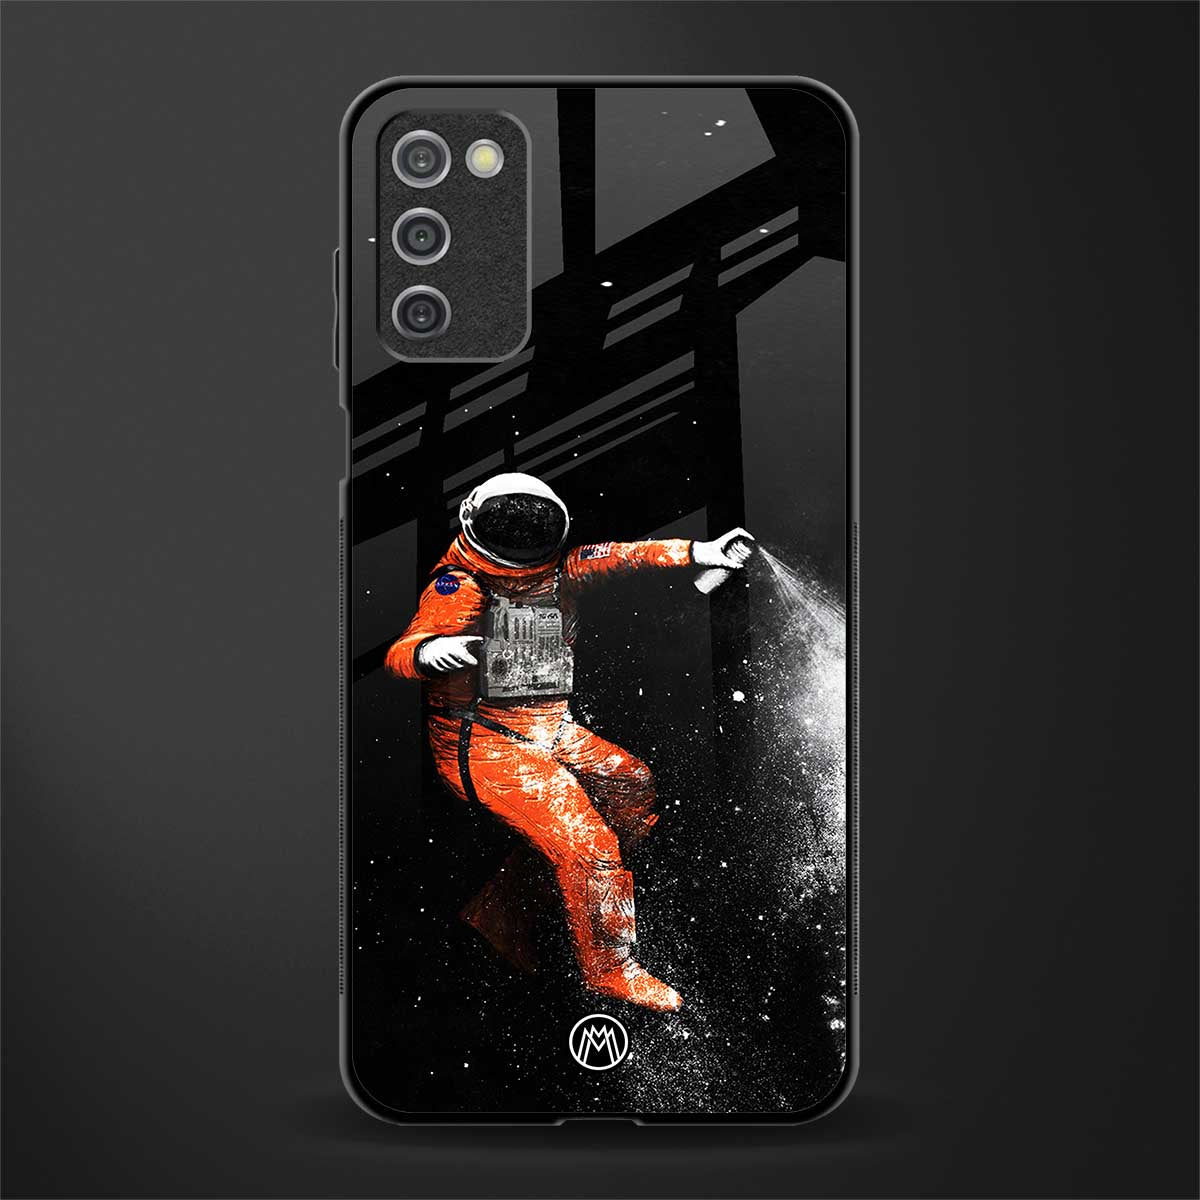 trippy astronaut glass case for samsung galaxy a03s image